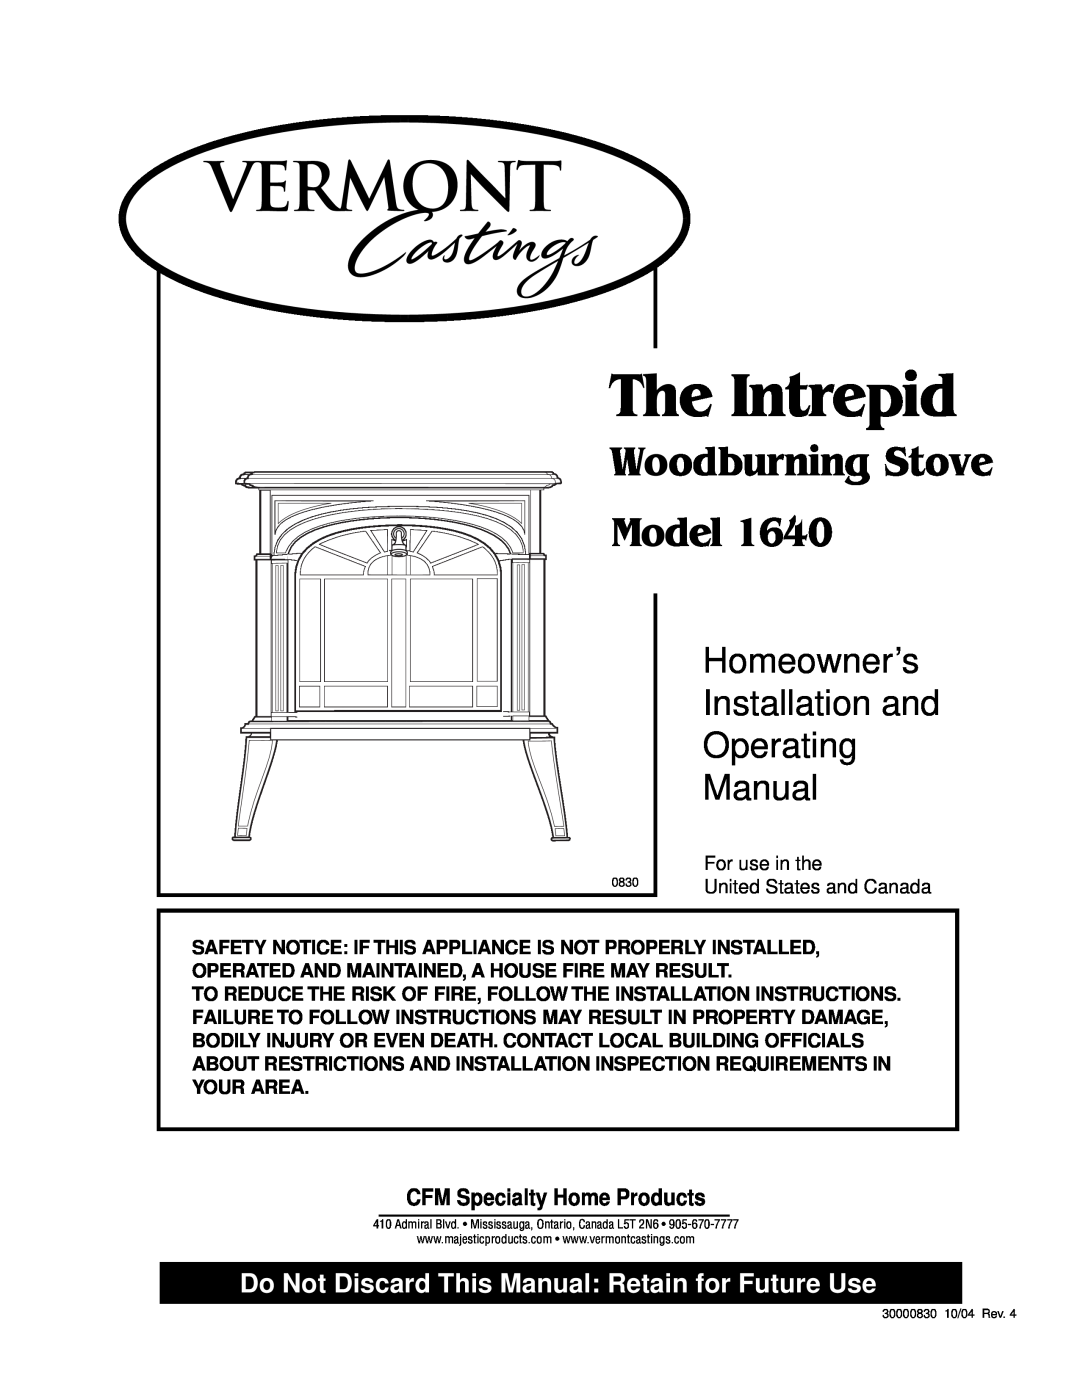 Vermont Casting 1640 installation instructions CFM Specialty Home Products, The Intrepid, Woodburning Stove Model 